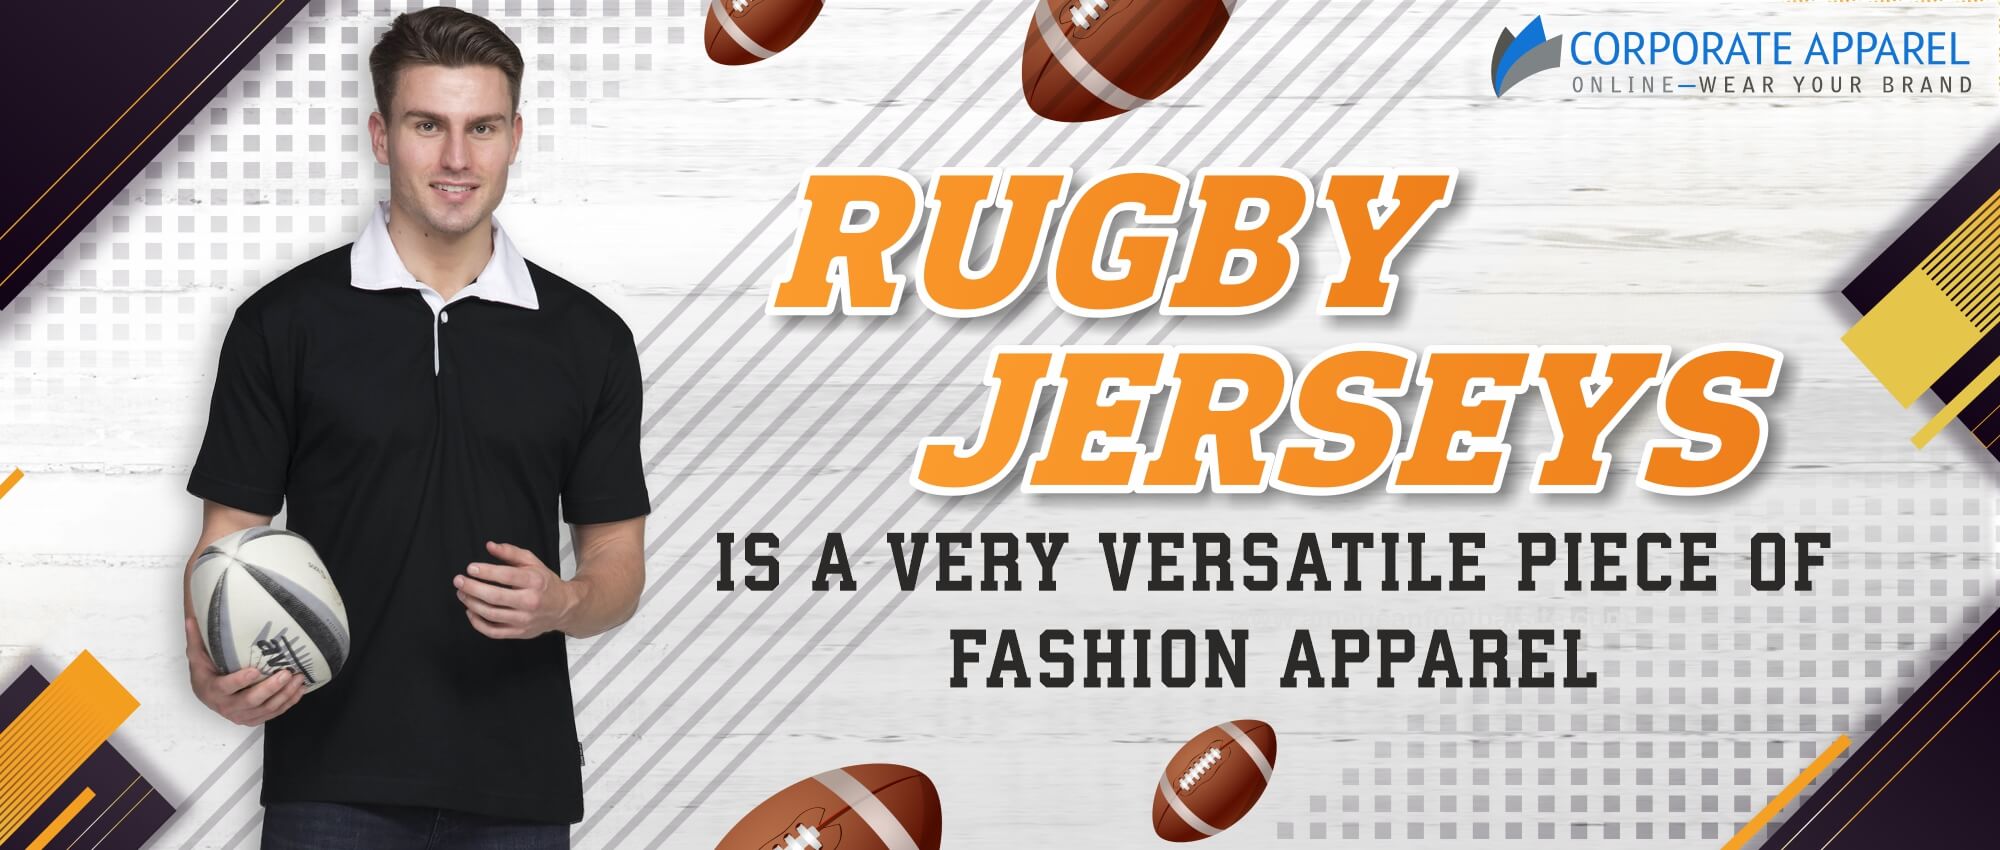 RUGBY JERSEY IS A VERY VERSATILE PIECE OF FASHION APPAREL